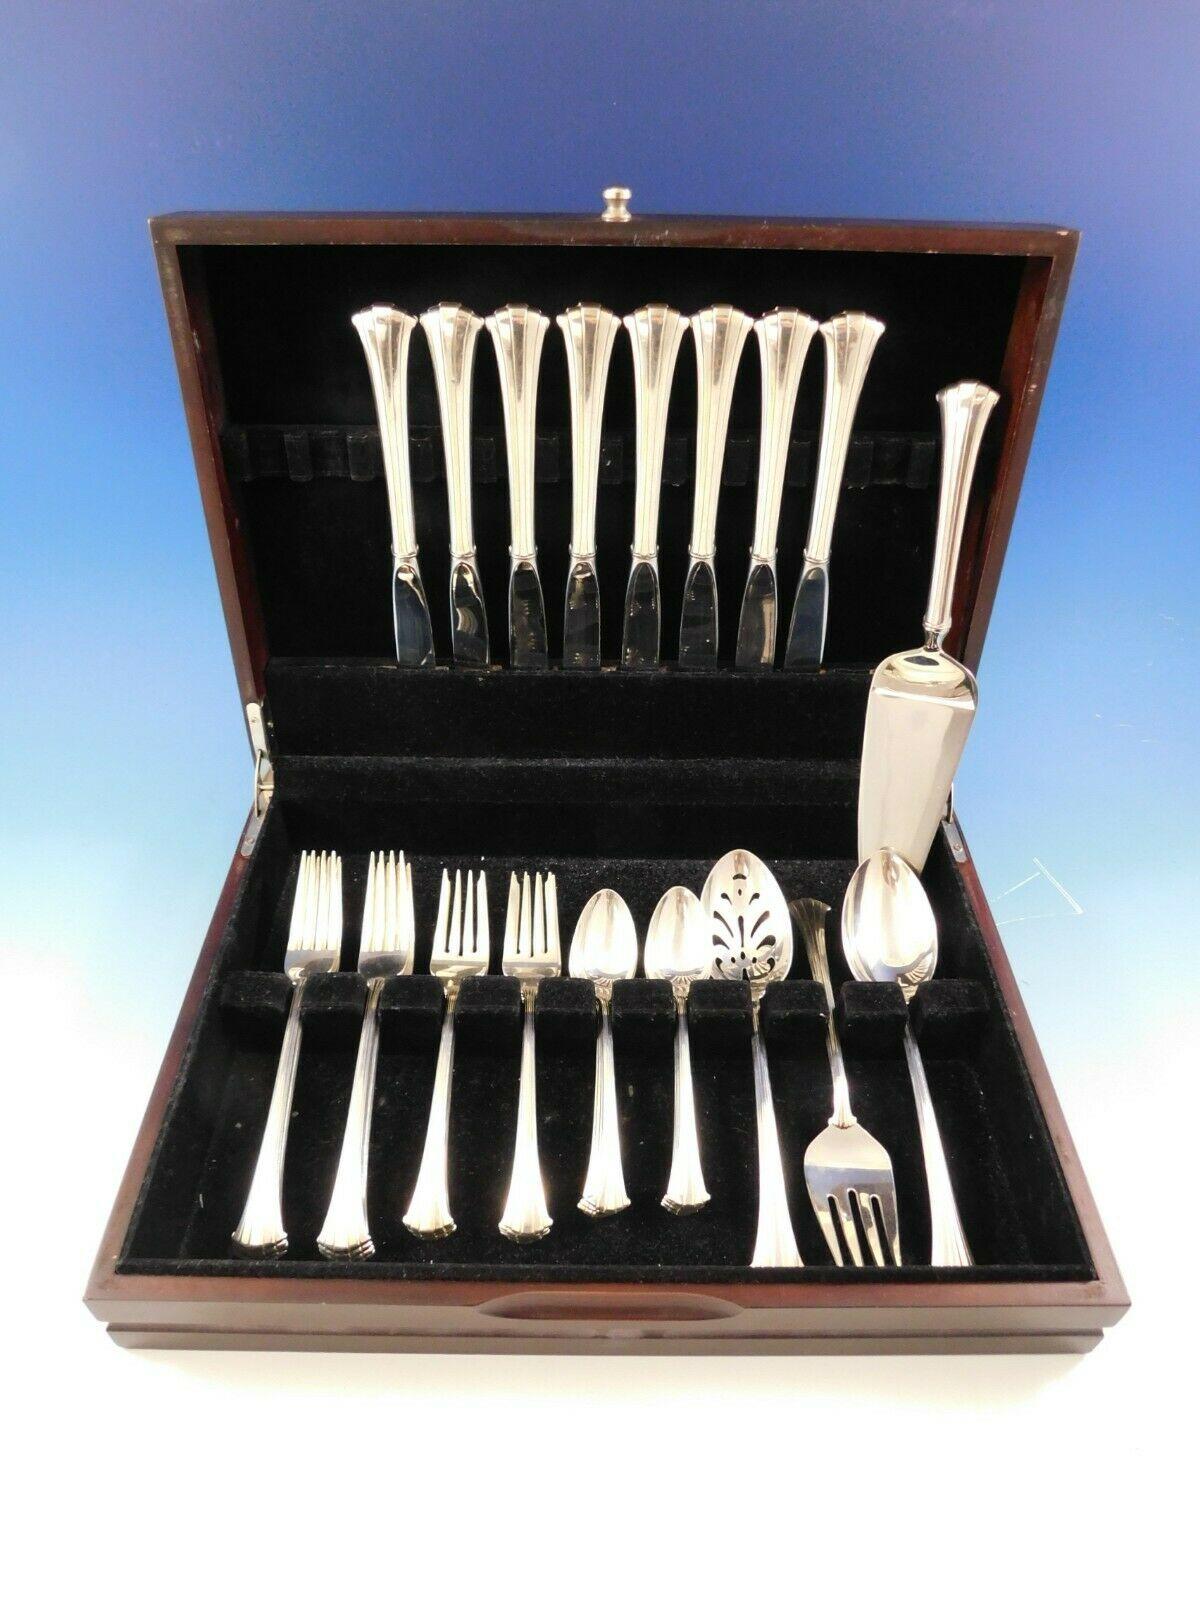 Newport scroll by Gorham sterling silver place size flatware set, 36 pieces. This set includes:

8 place size knives, 9 1/8